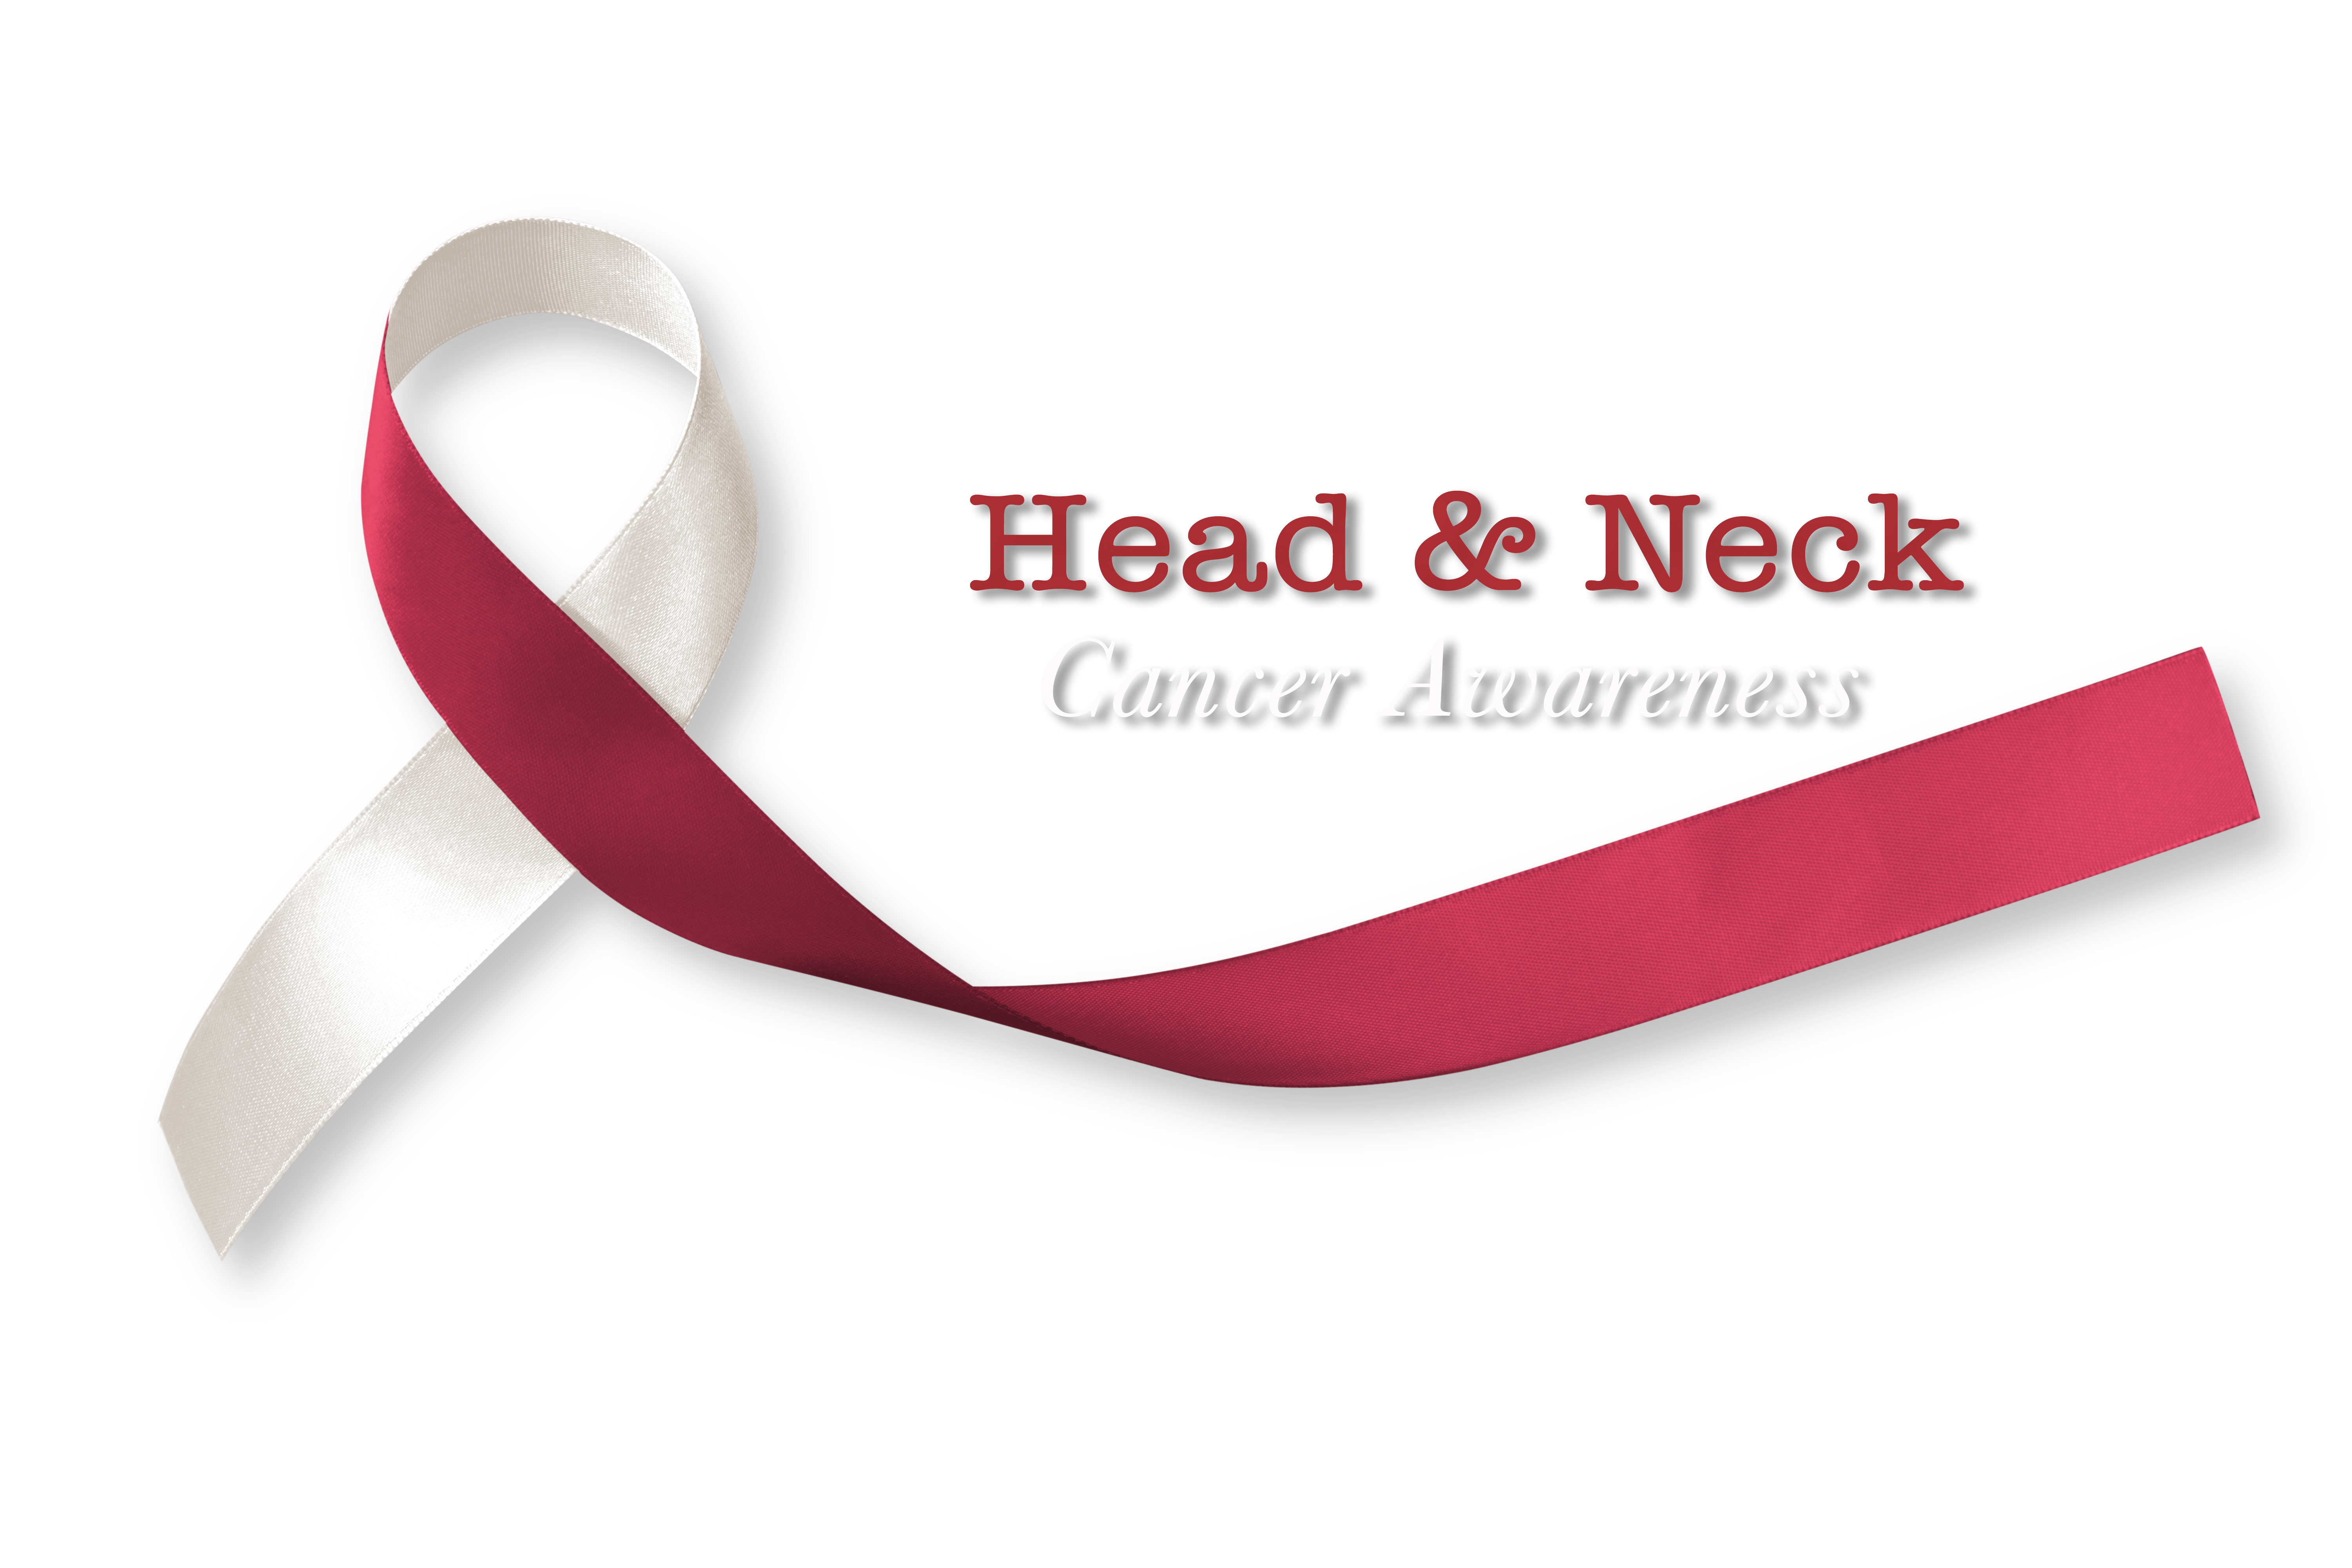 Neck and Head Cancer Latest News